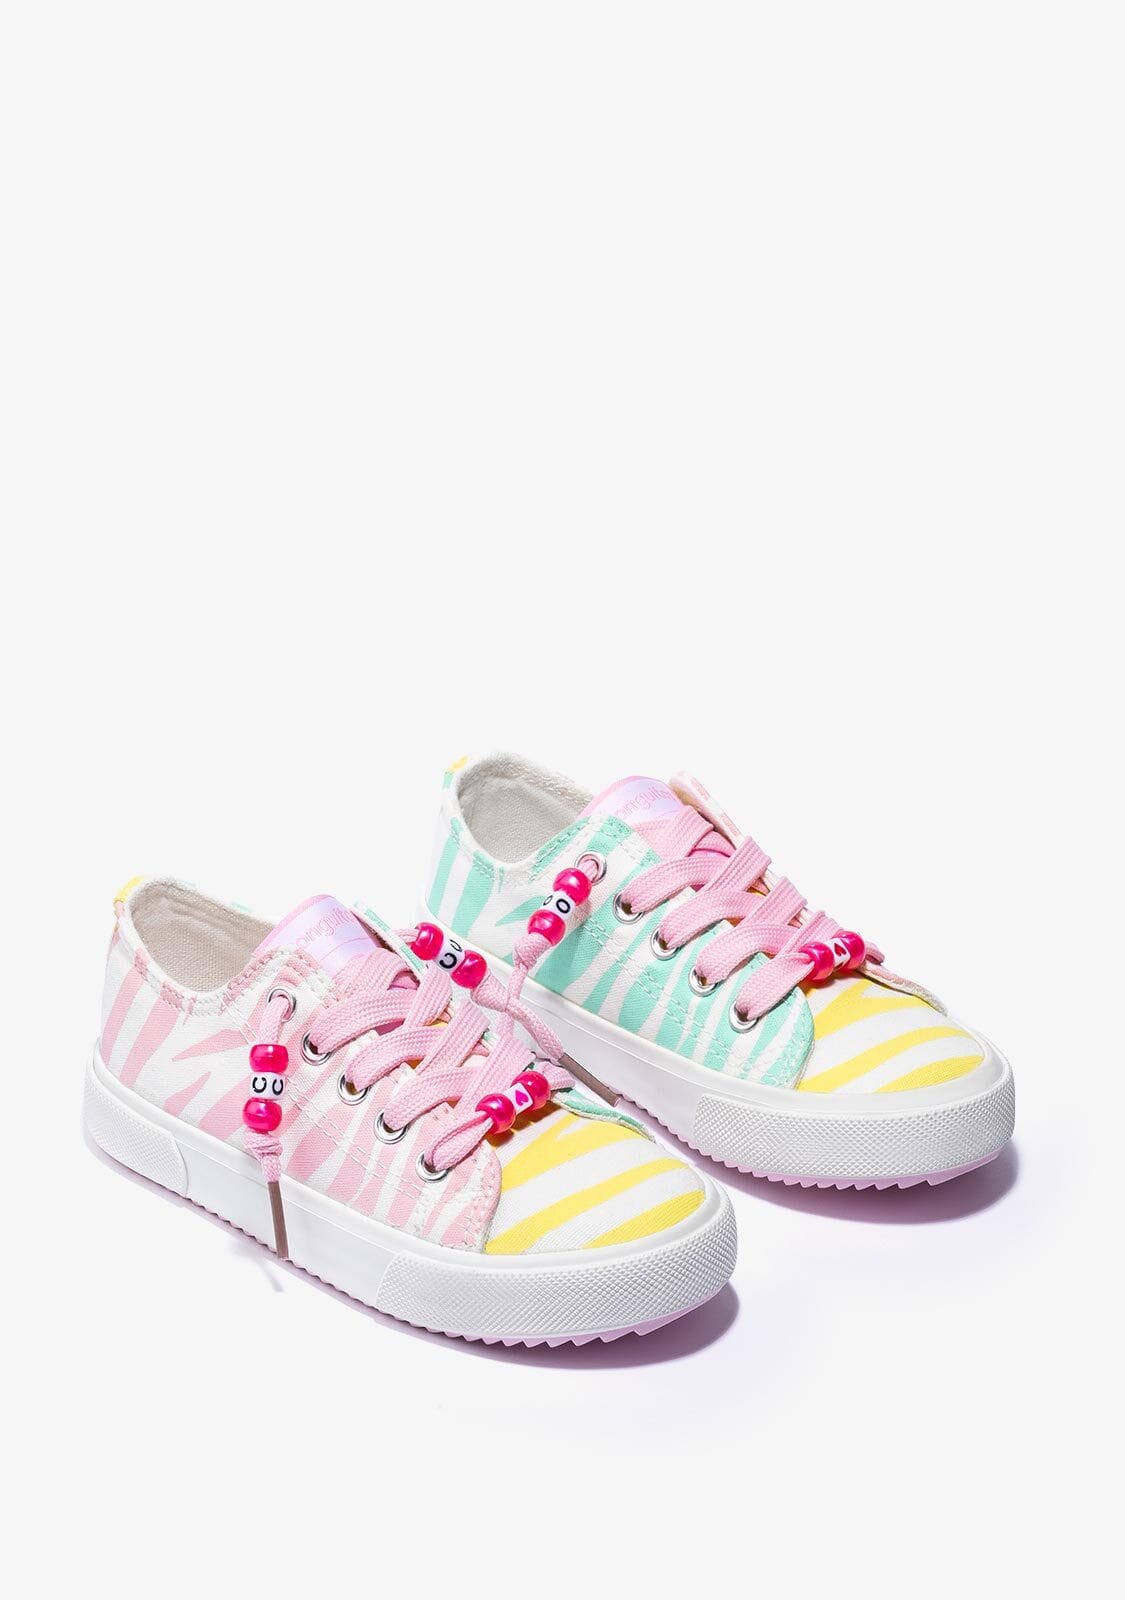 CONGUITOS Shoes Girl's Zebra Pink Sneakers Canvas